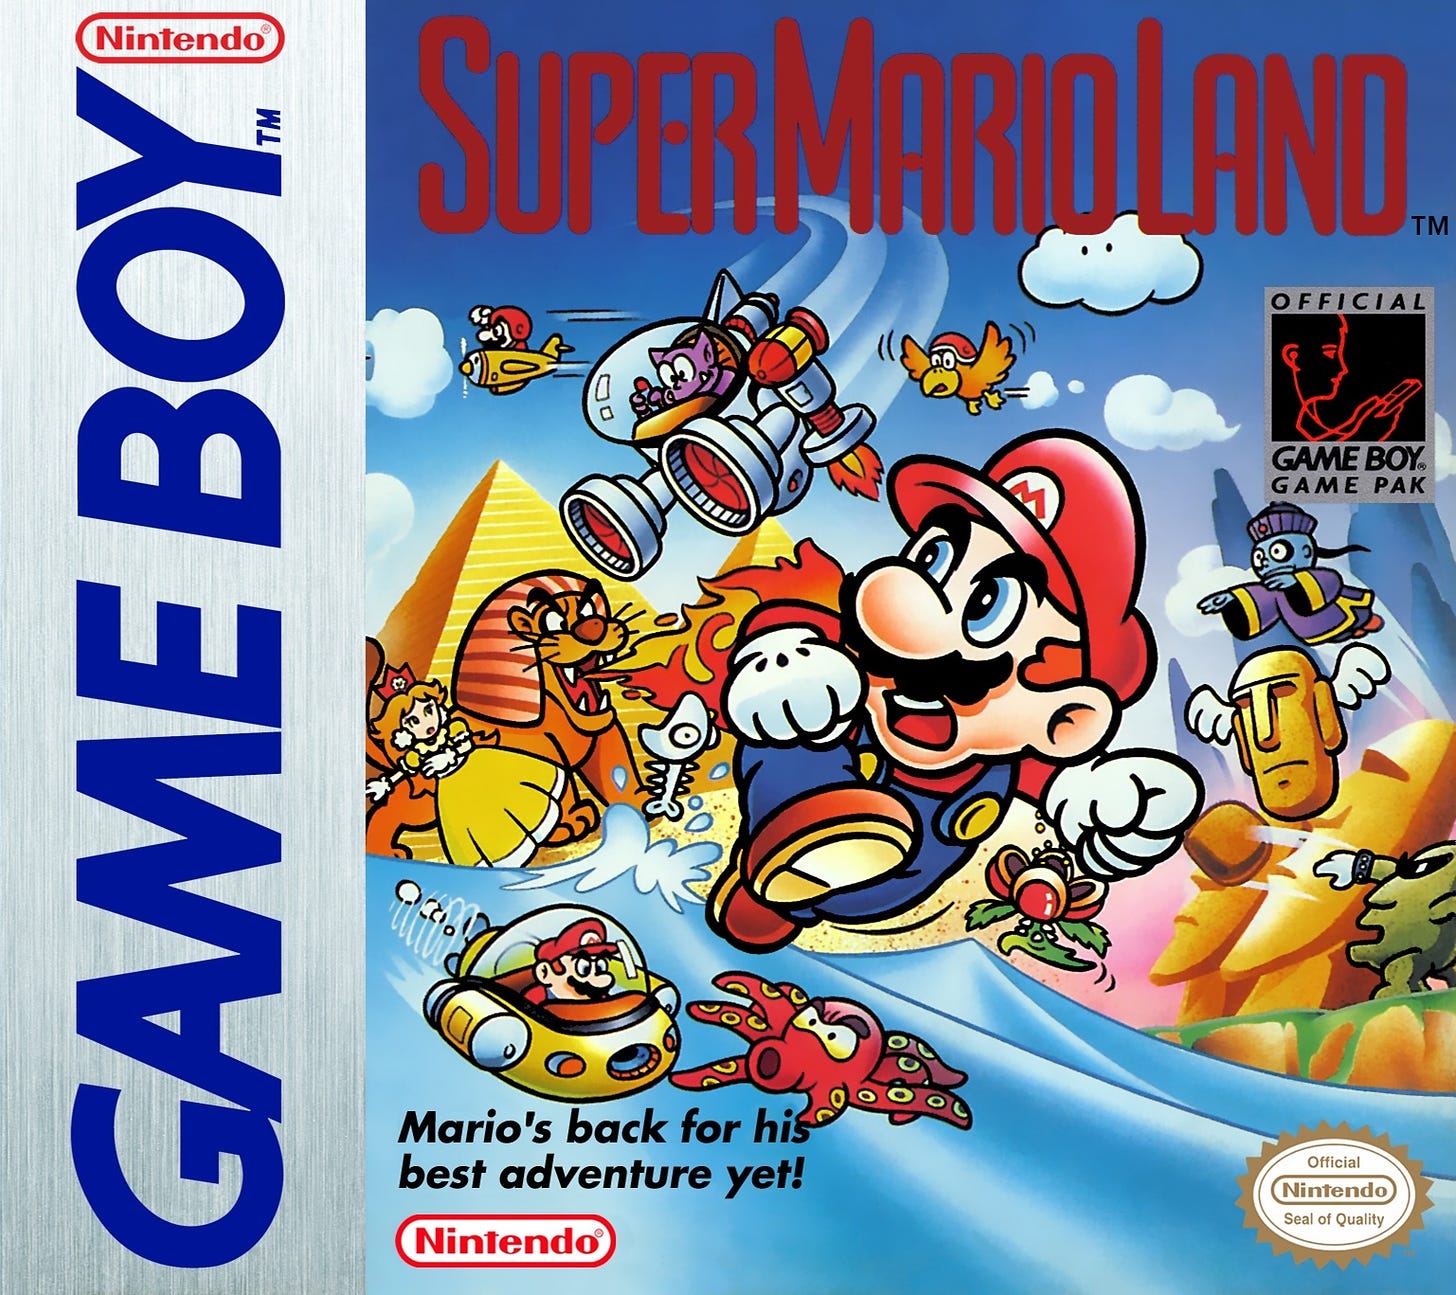 The box art for Super Mario Land, featuring Mario's use of vehicles, and the strange new foes he'd face